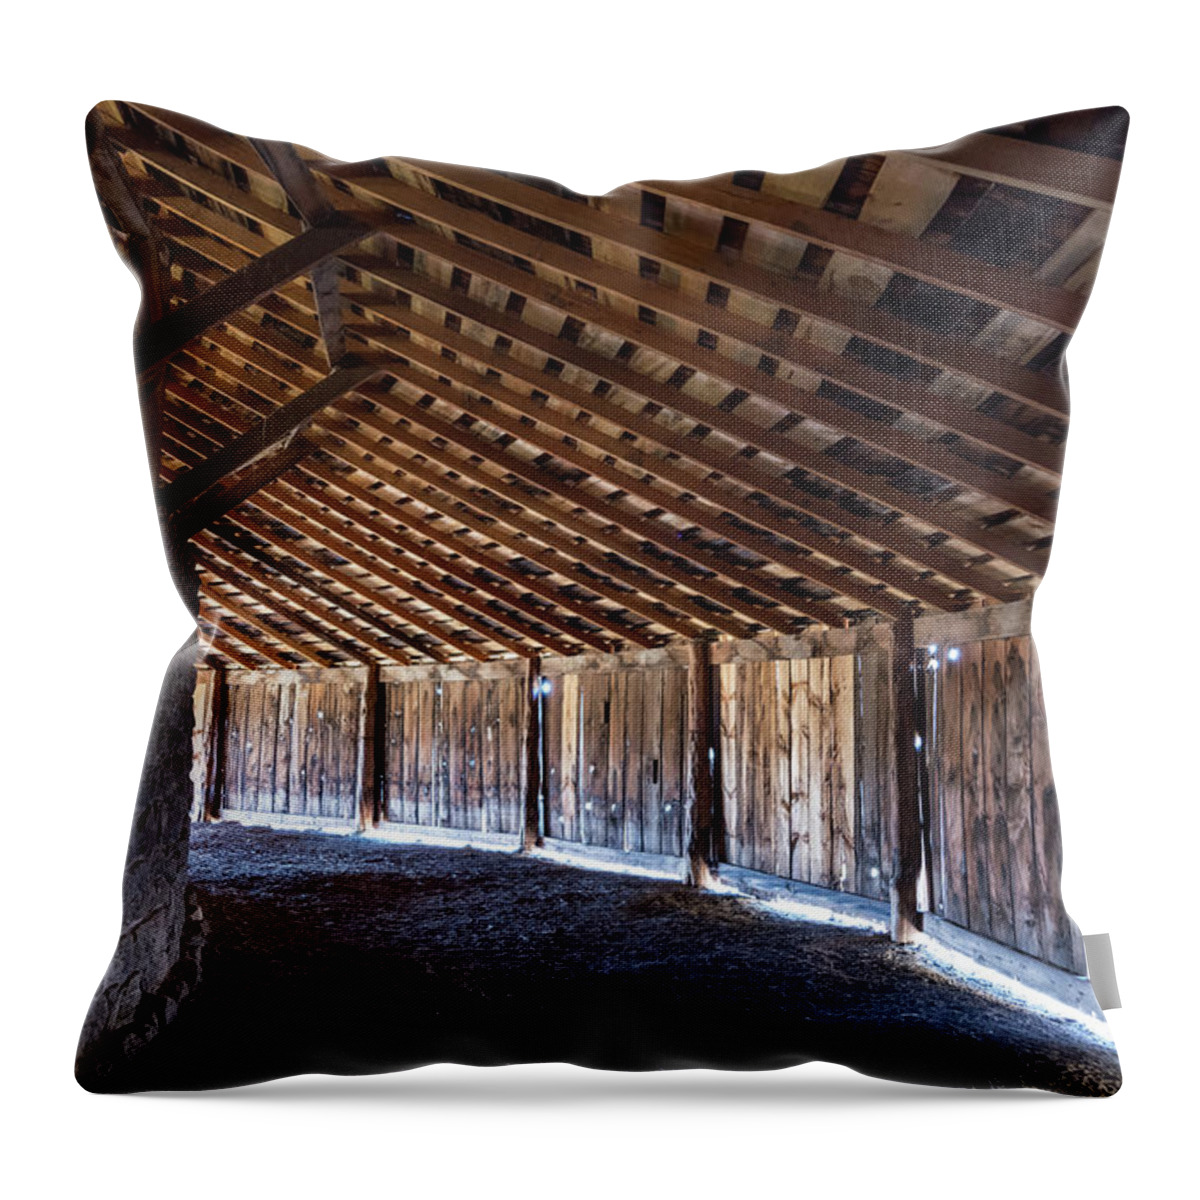 Barns Throw Pillow featuring the photograph Round Barn by Steven Clark